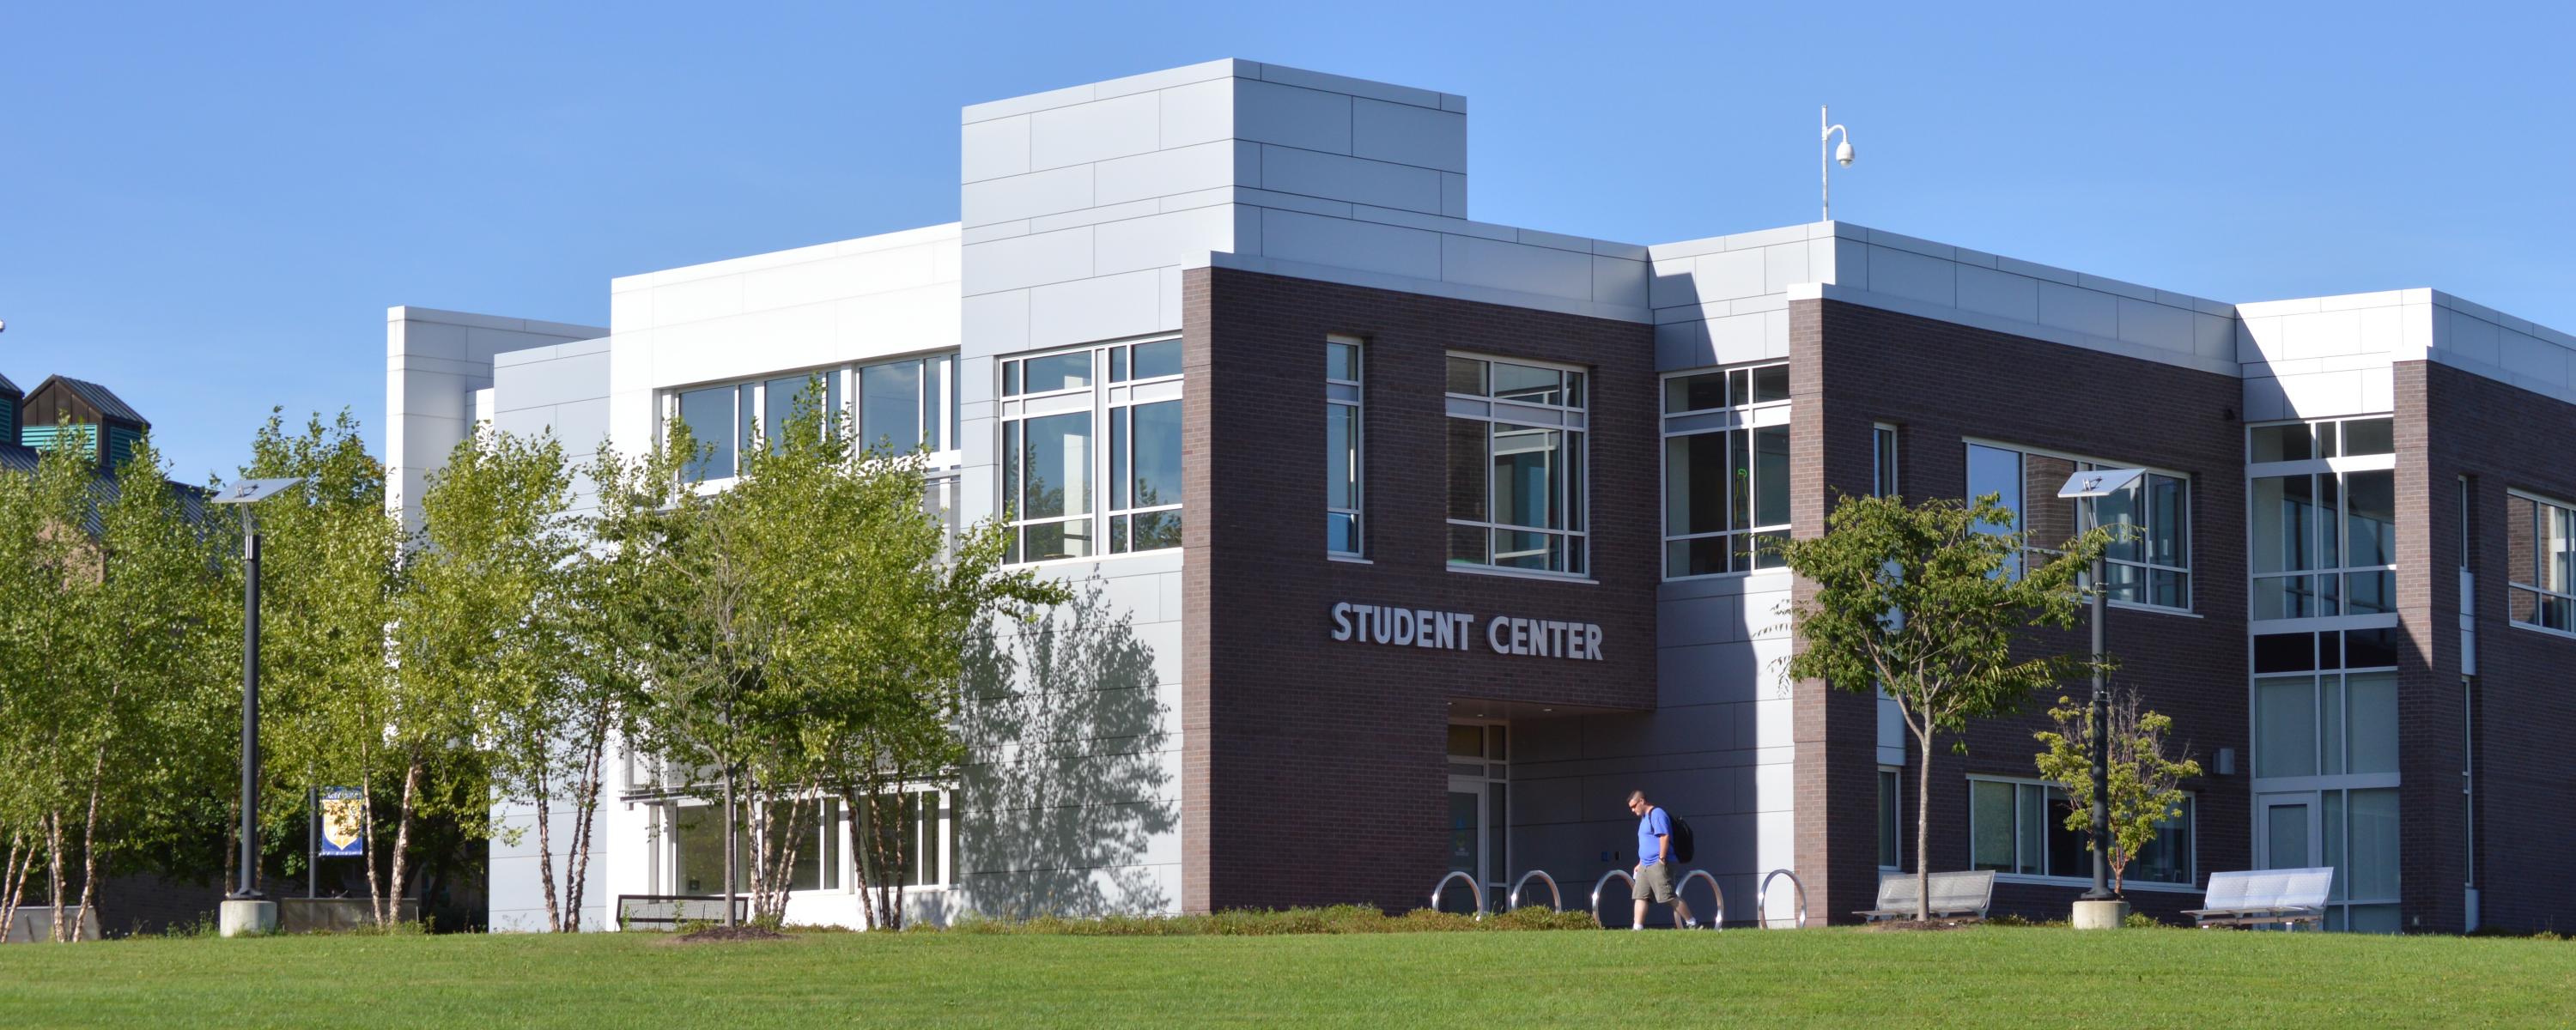 SUNY Poly's Utica Campus Student Center